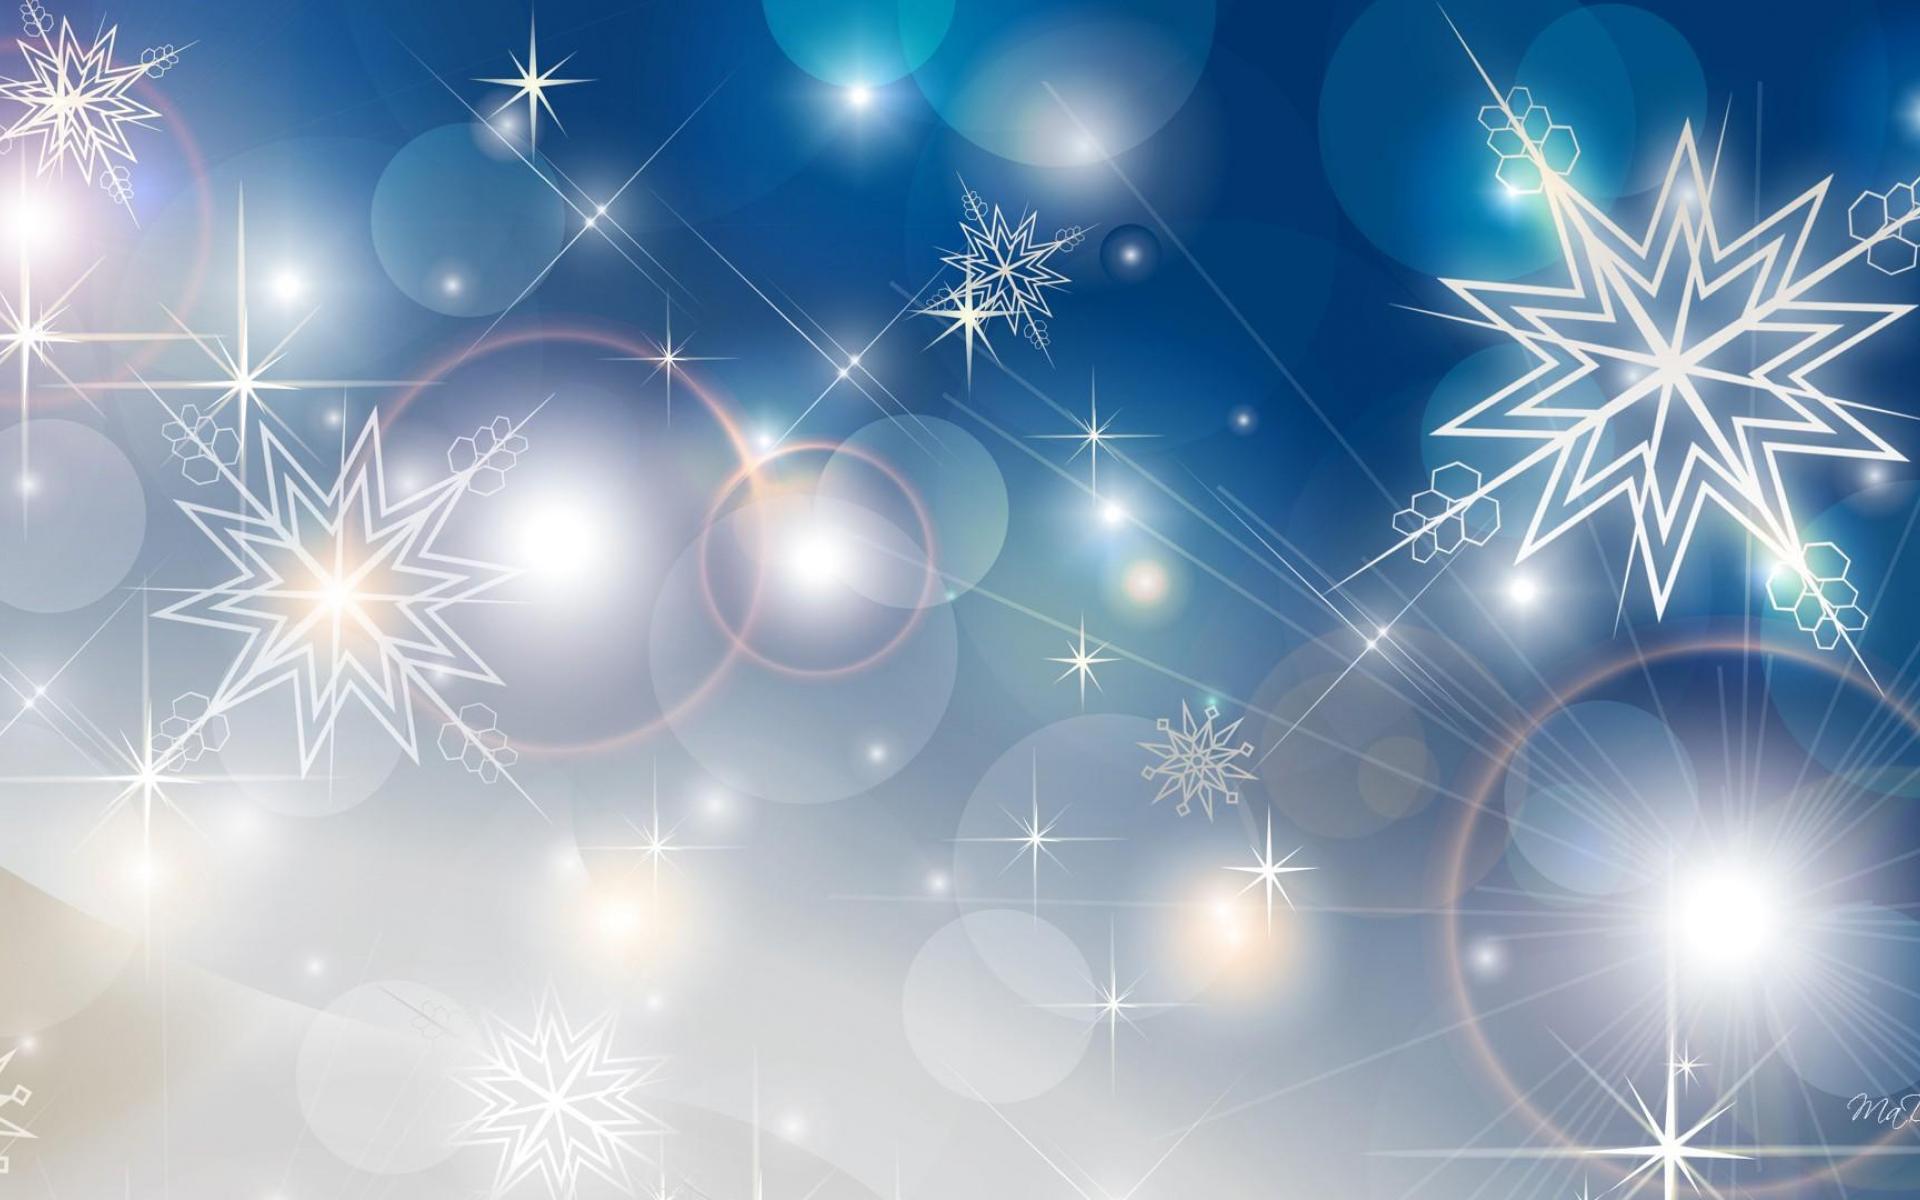 Free Holiday Images To Download - Snowflakes And Lights Background - HD Wallpaper 